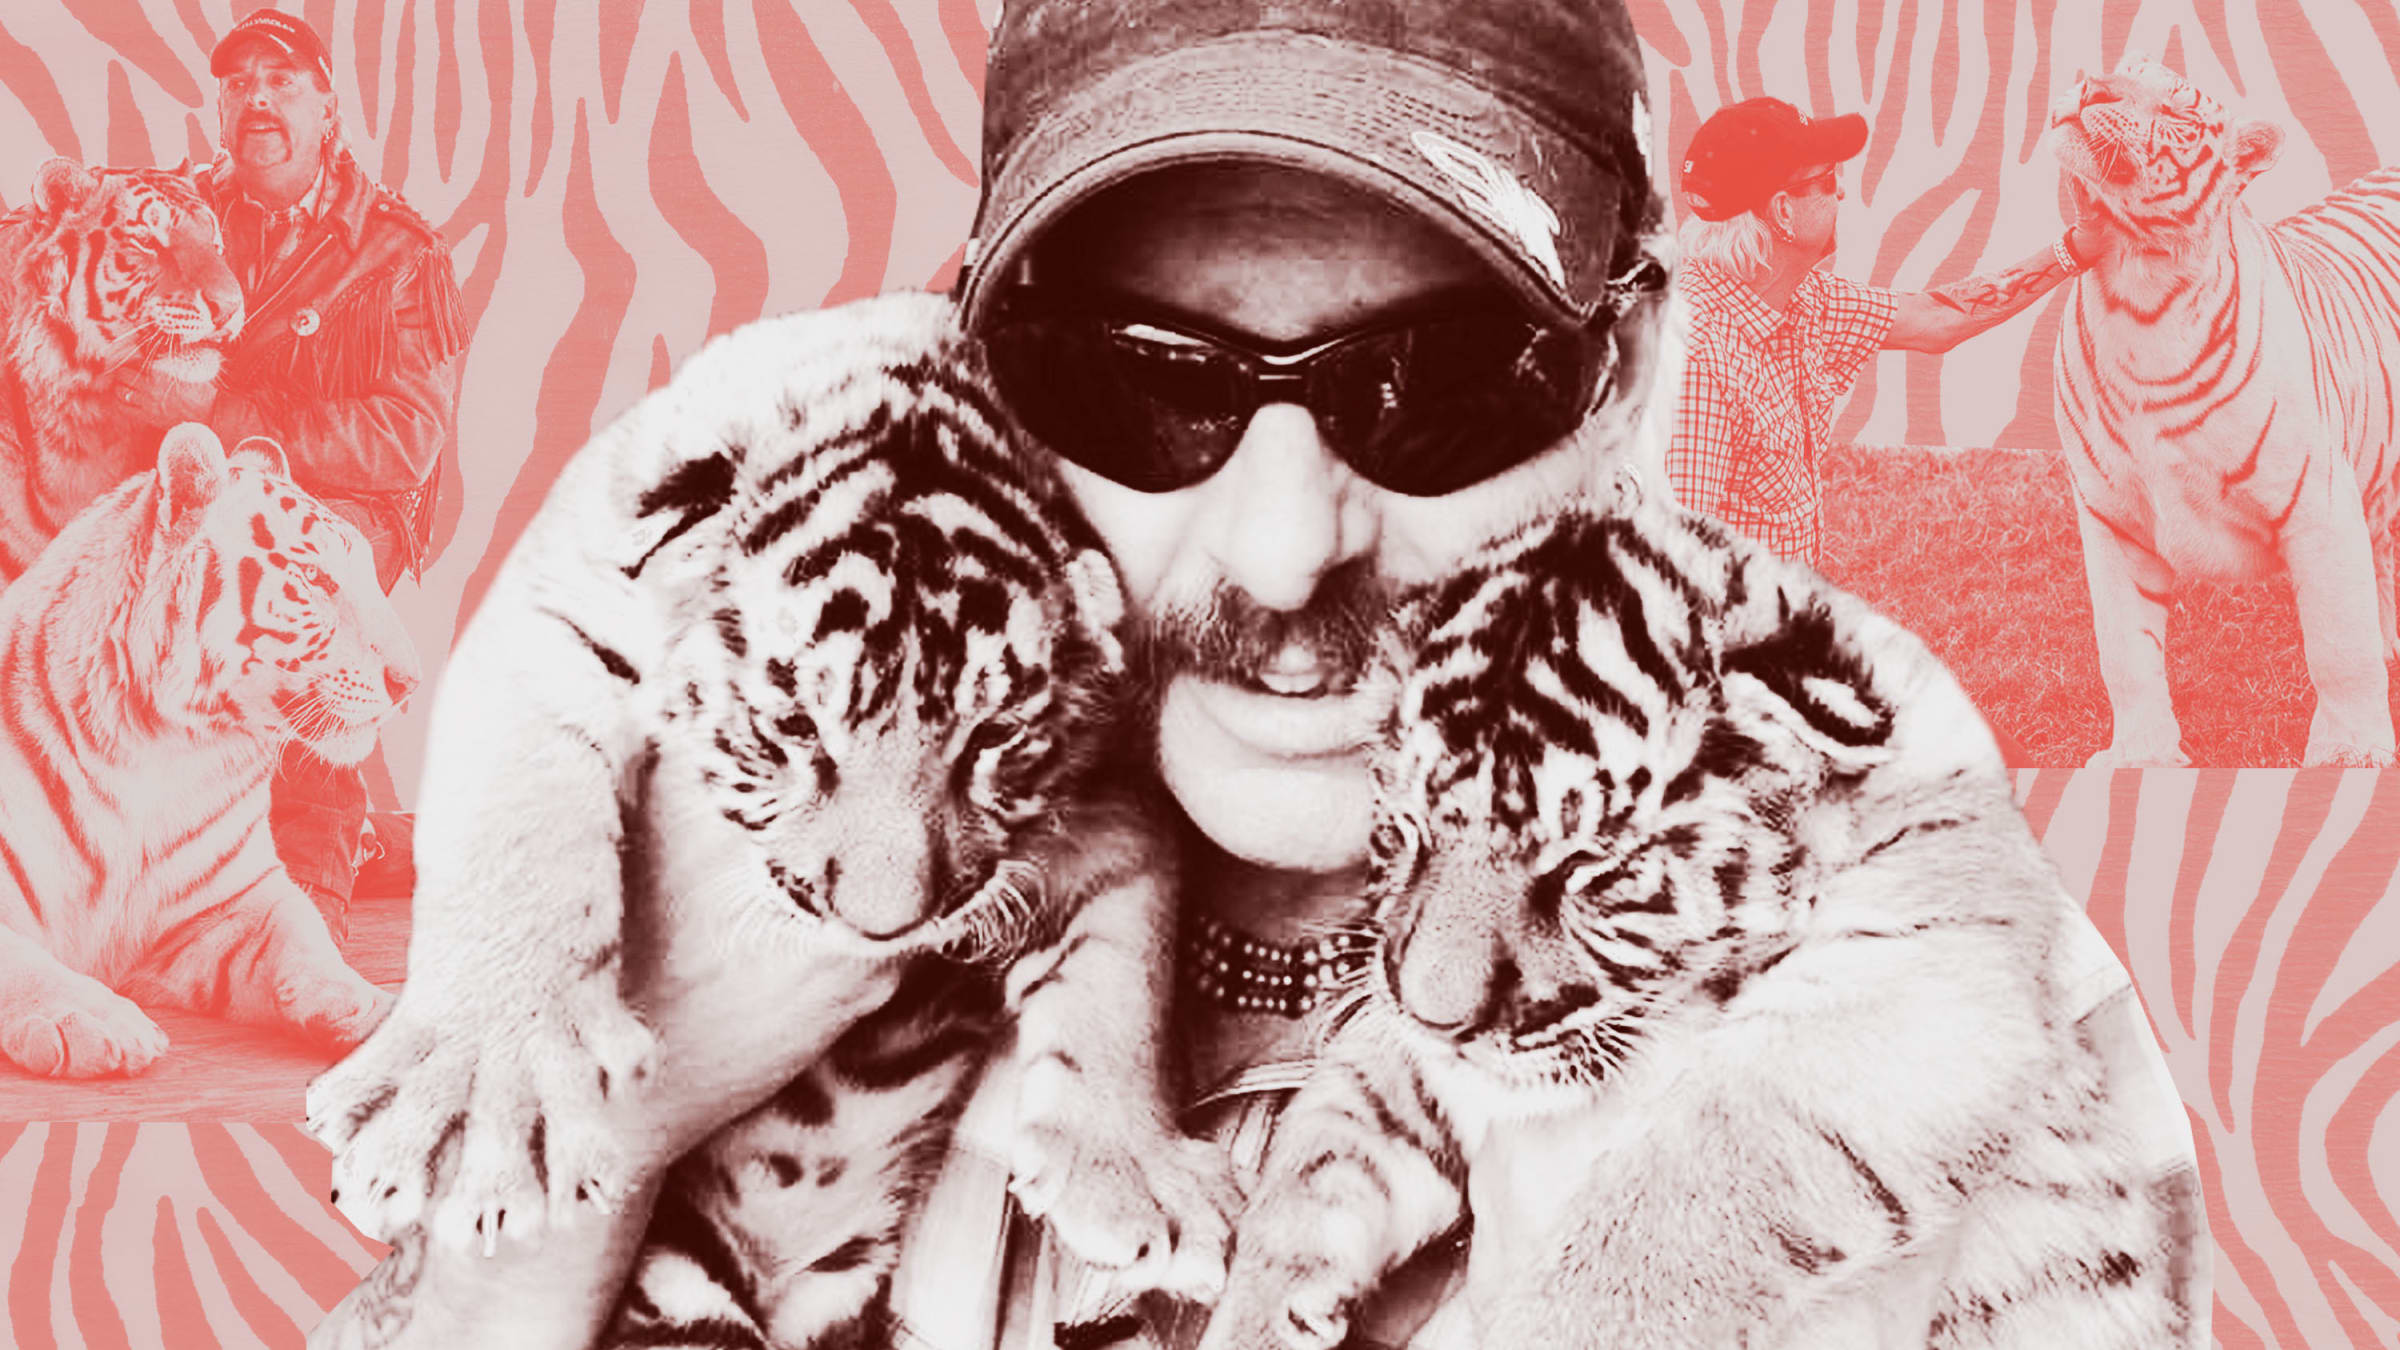 Joe Exotic Built a Wild Animal Kingdom. He Was the Most Dangerous Predator  of Them All.